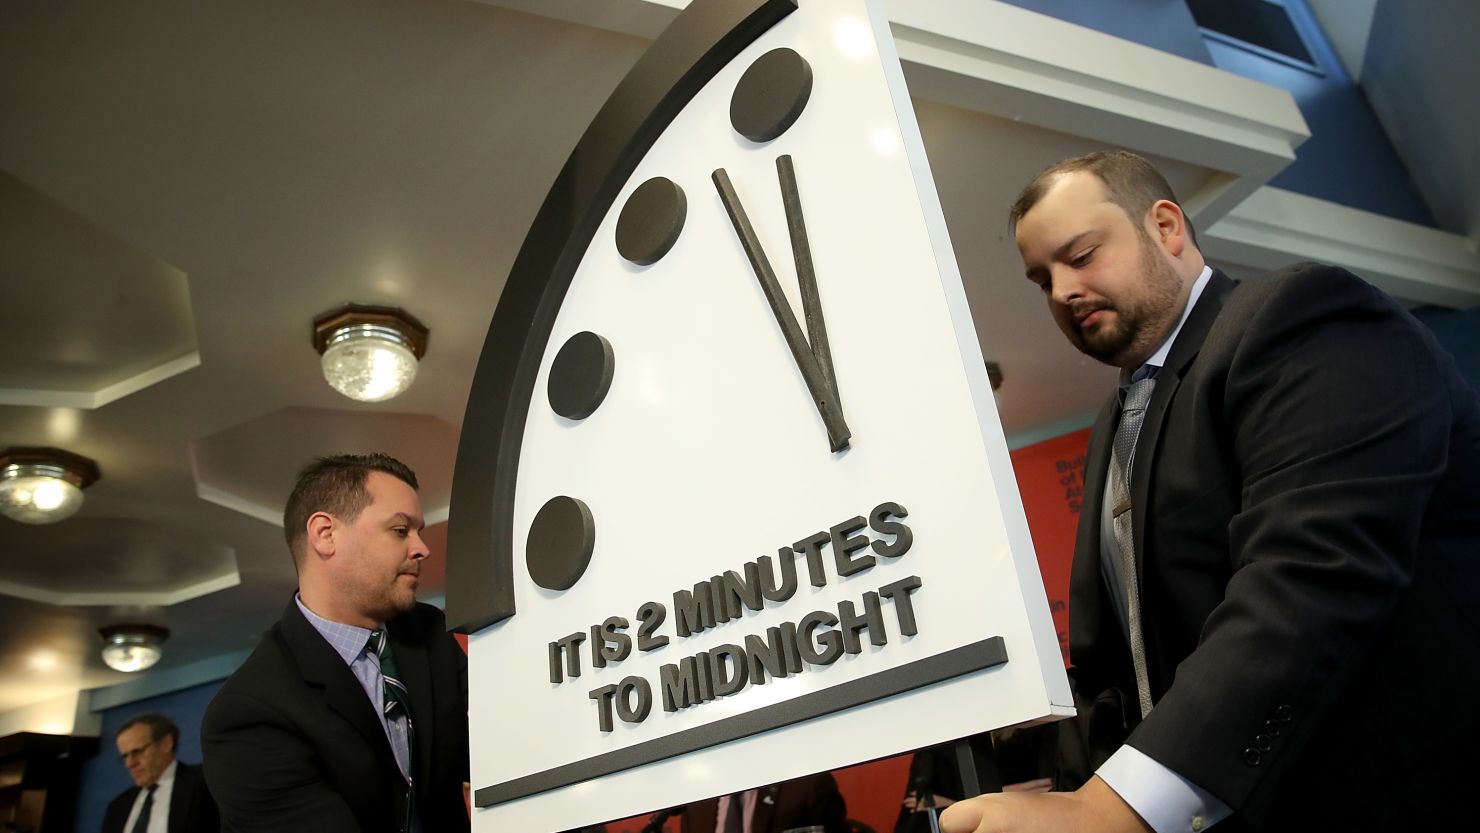 doomsday clock two minutes